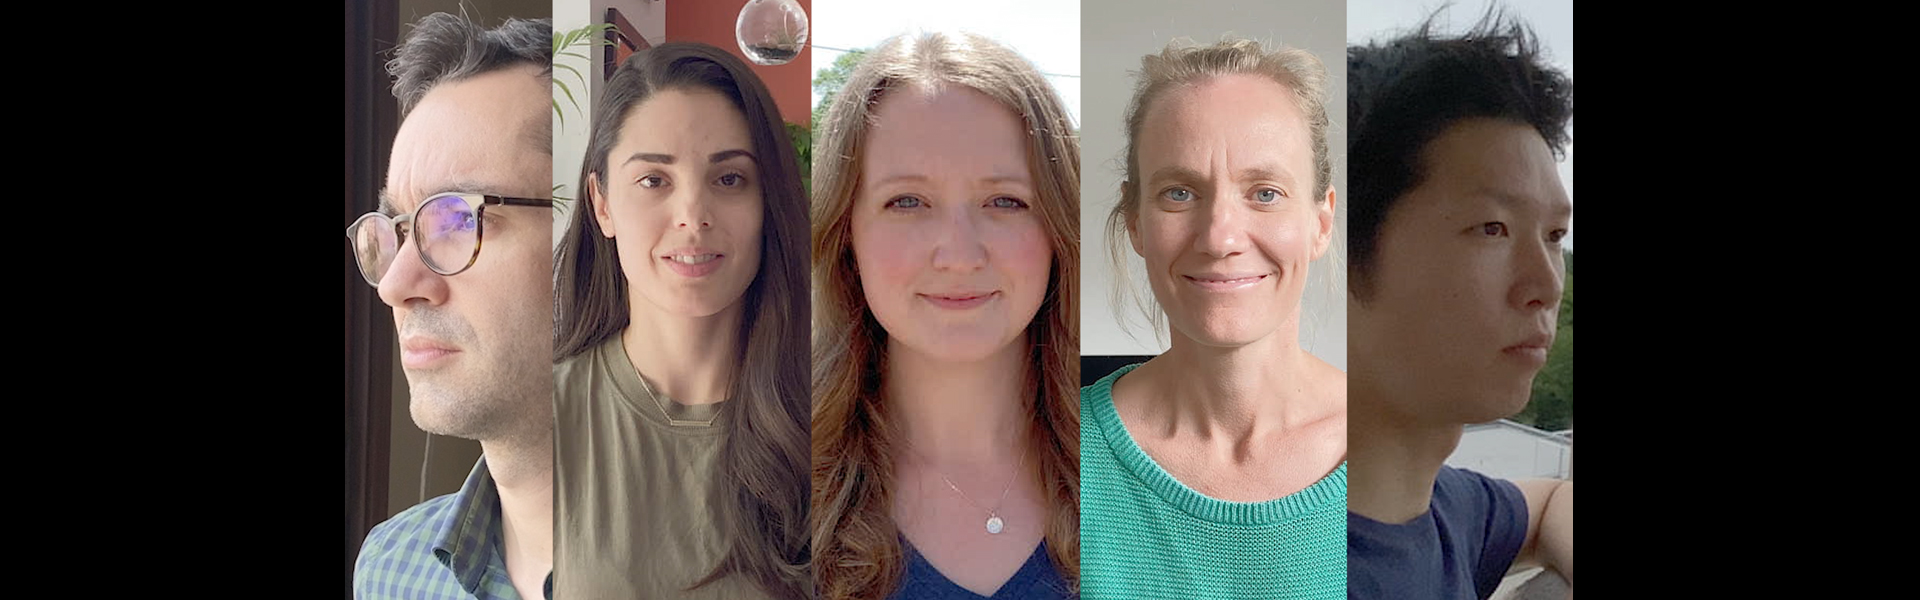 In Their Words: Five People with Ulcerative Colitis Speak Up about Their Disease Journeys